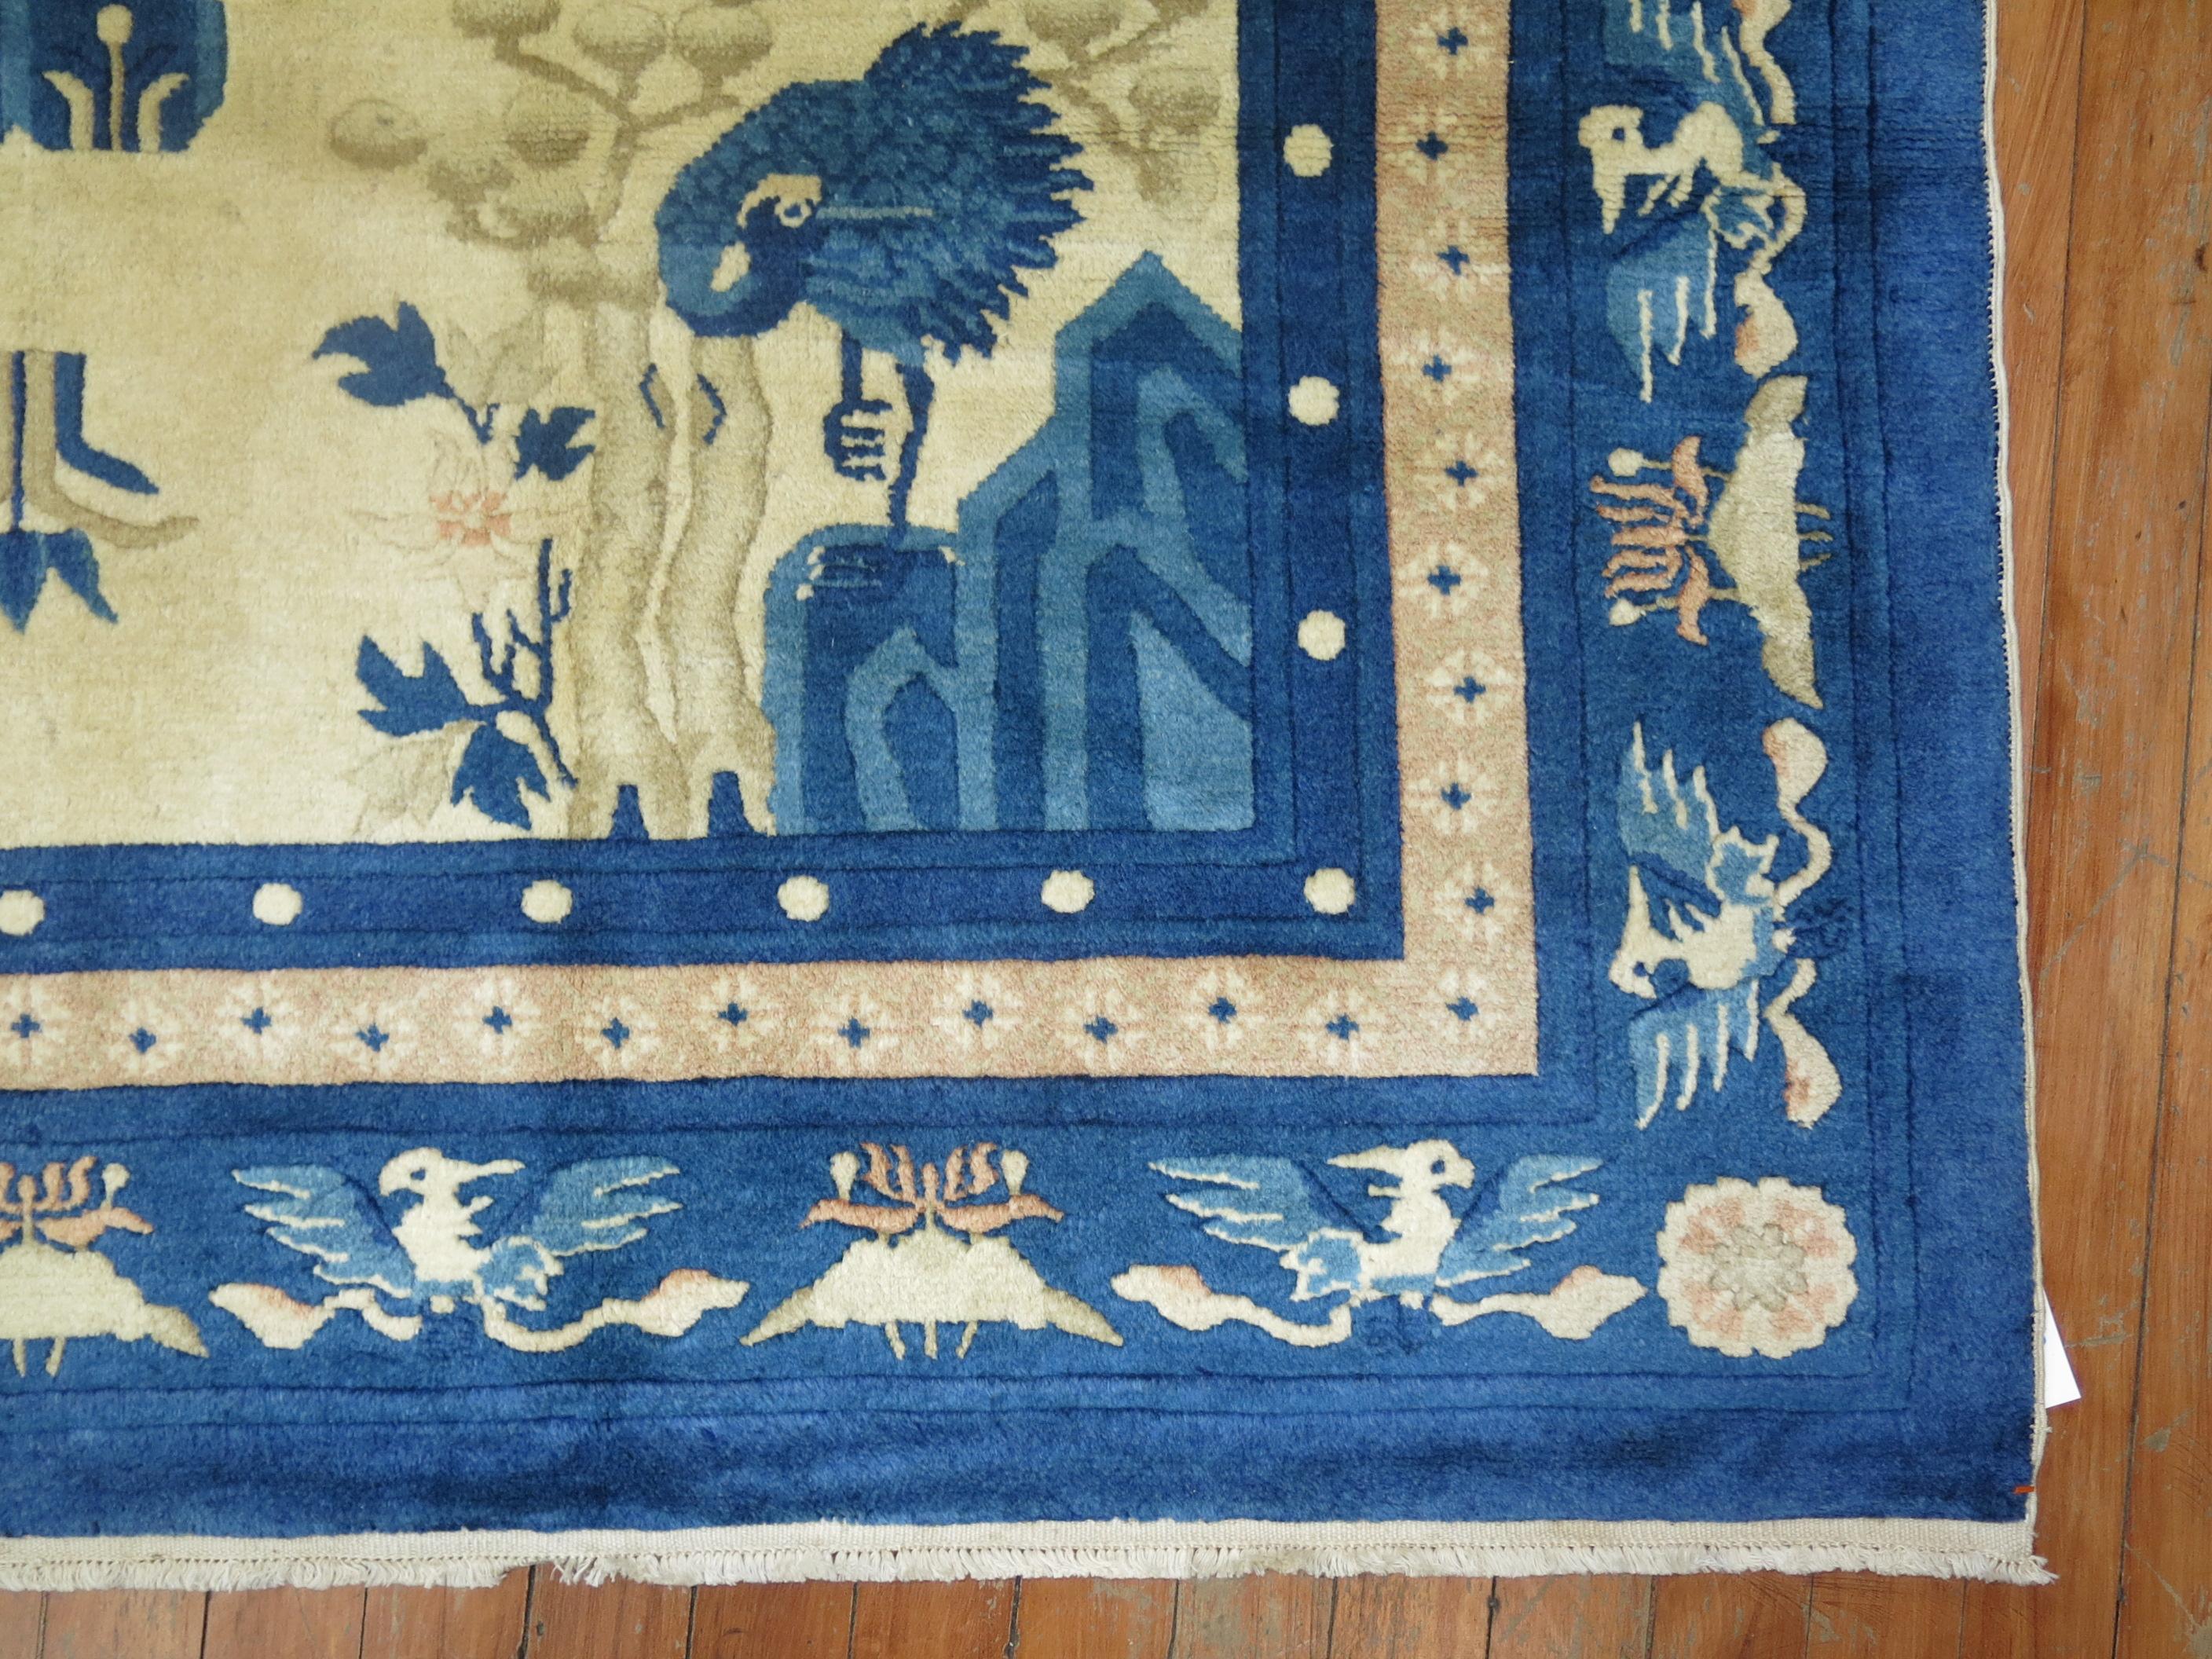 An early 20th century fine quality Chinese animal pictorial rug featuring an anonymous blue elephant.

4'9'' x 7'8''

Decorative oriental, Chinese rugs and carpets have been a significant art form within the Chinese culture for many centuries, if